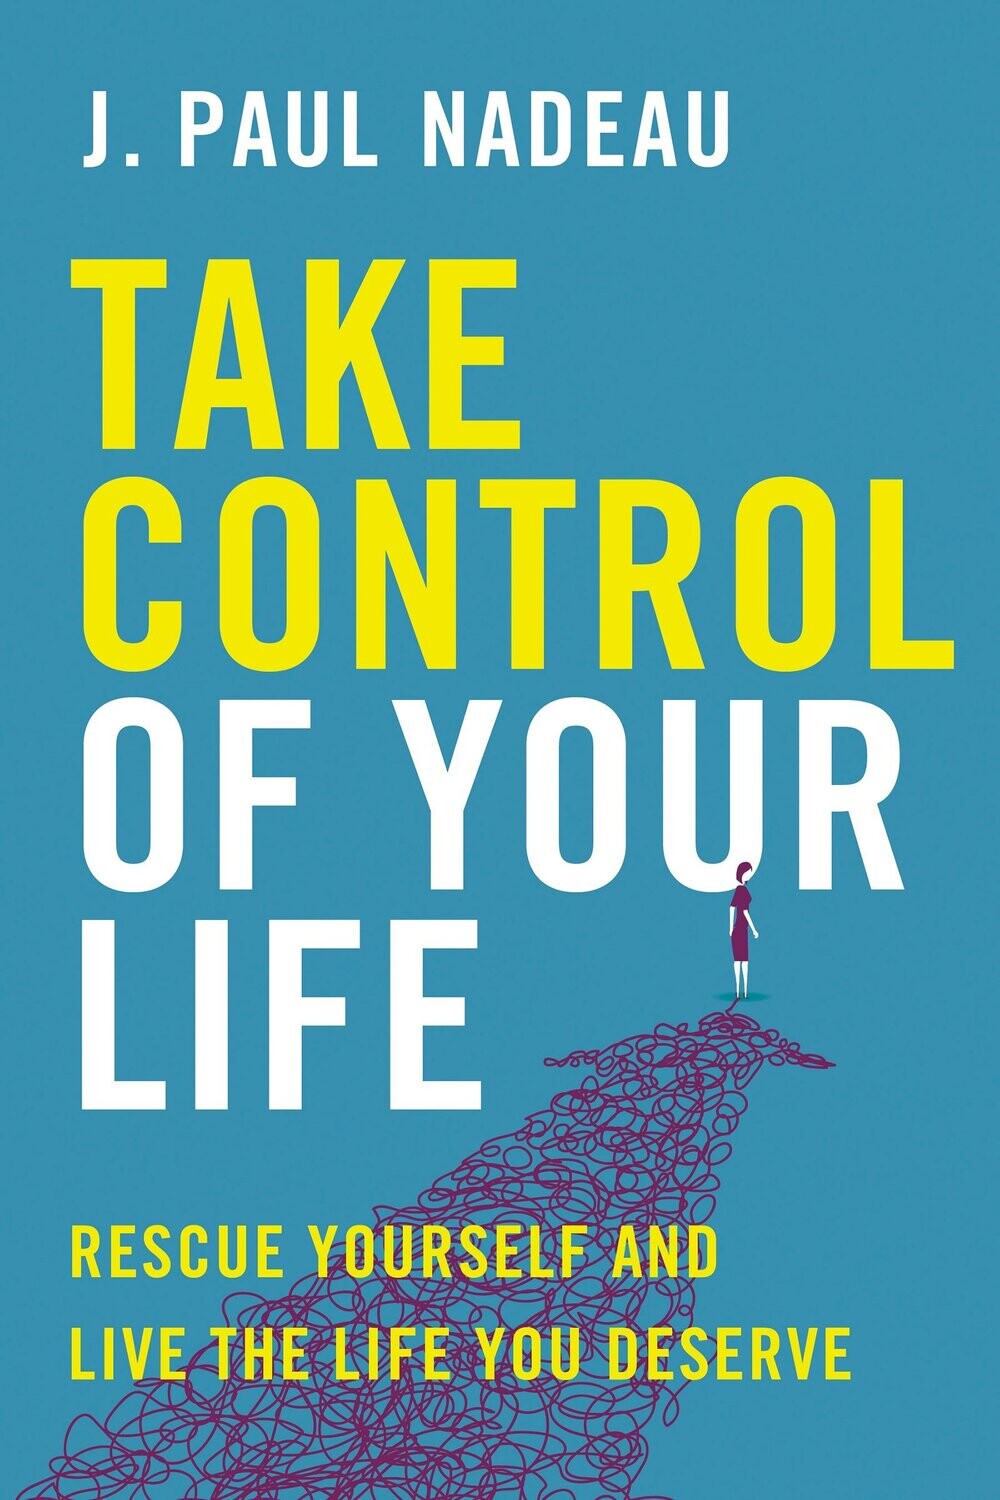 Take Control of Your Life: J. Paul Nadeau